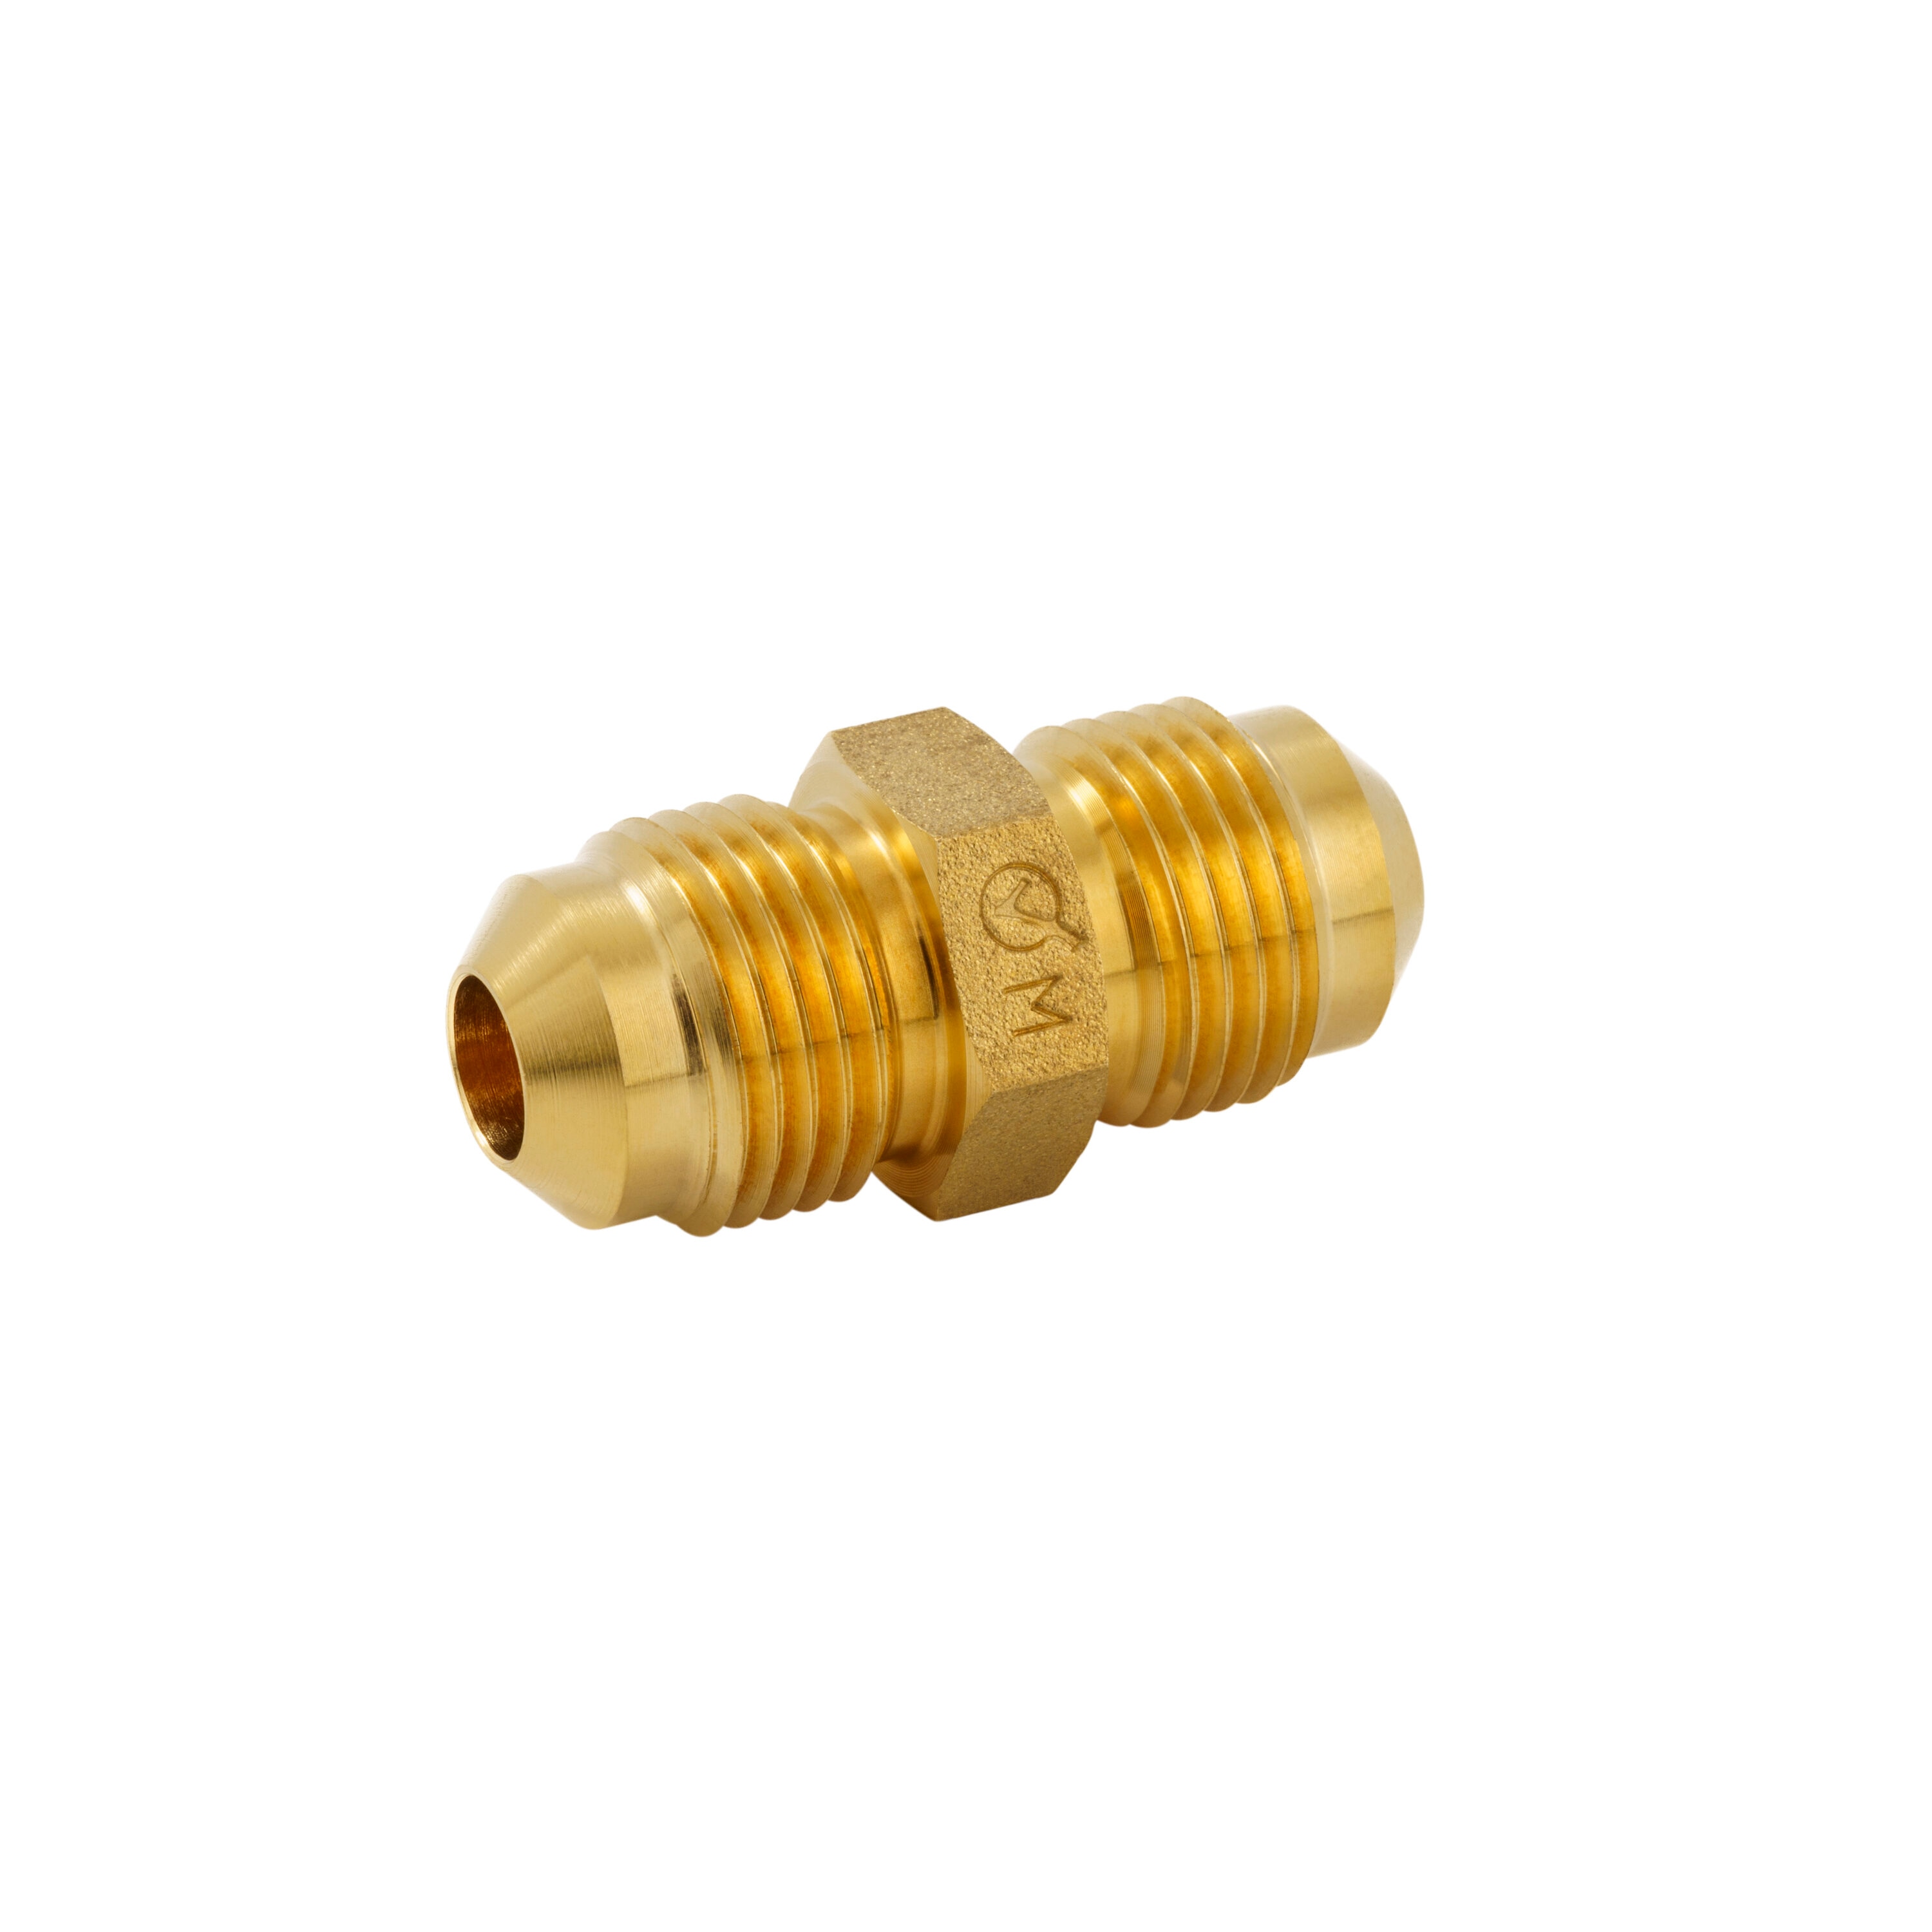 Proline Series 3/4-in x 3/4-in Threaded Male Adapter Fitting in